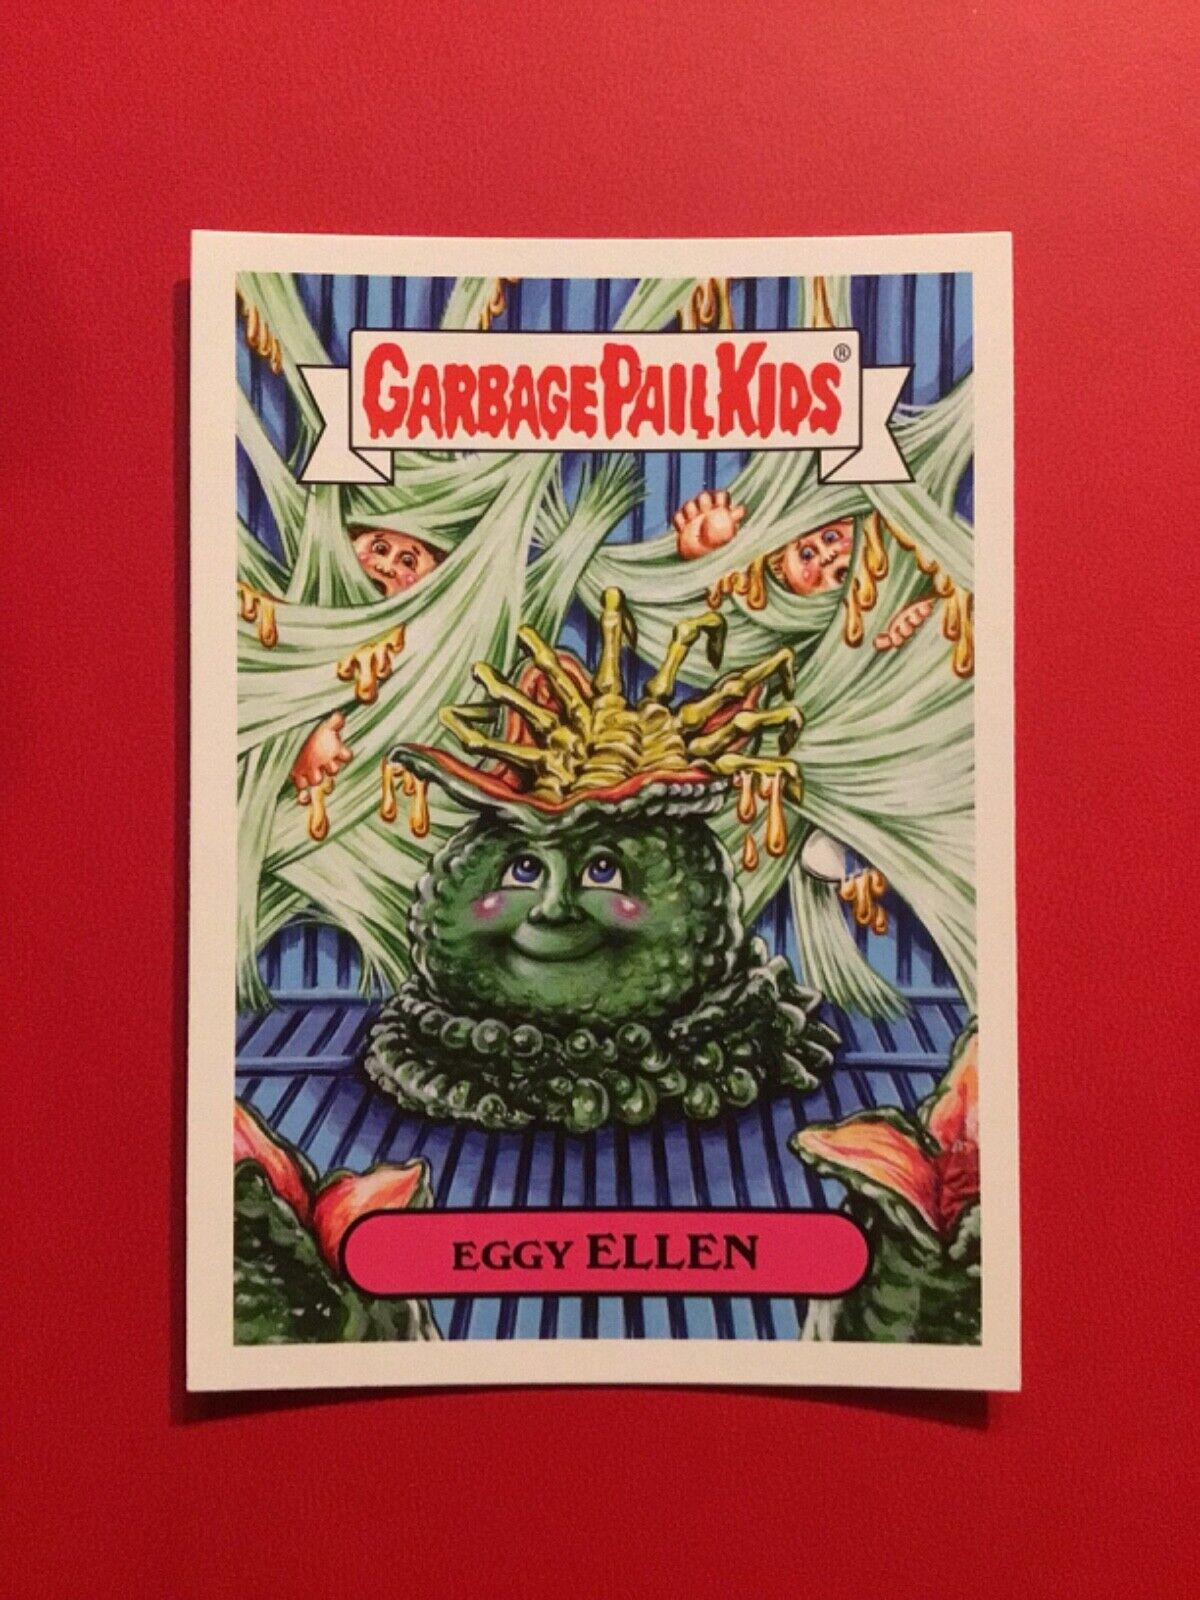 2019 Topps Garbage Pail Kids: Revenge of Oh The Horror-ible (Buy 3 Get 1 Free)